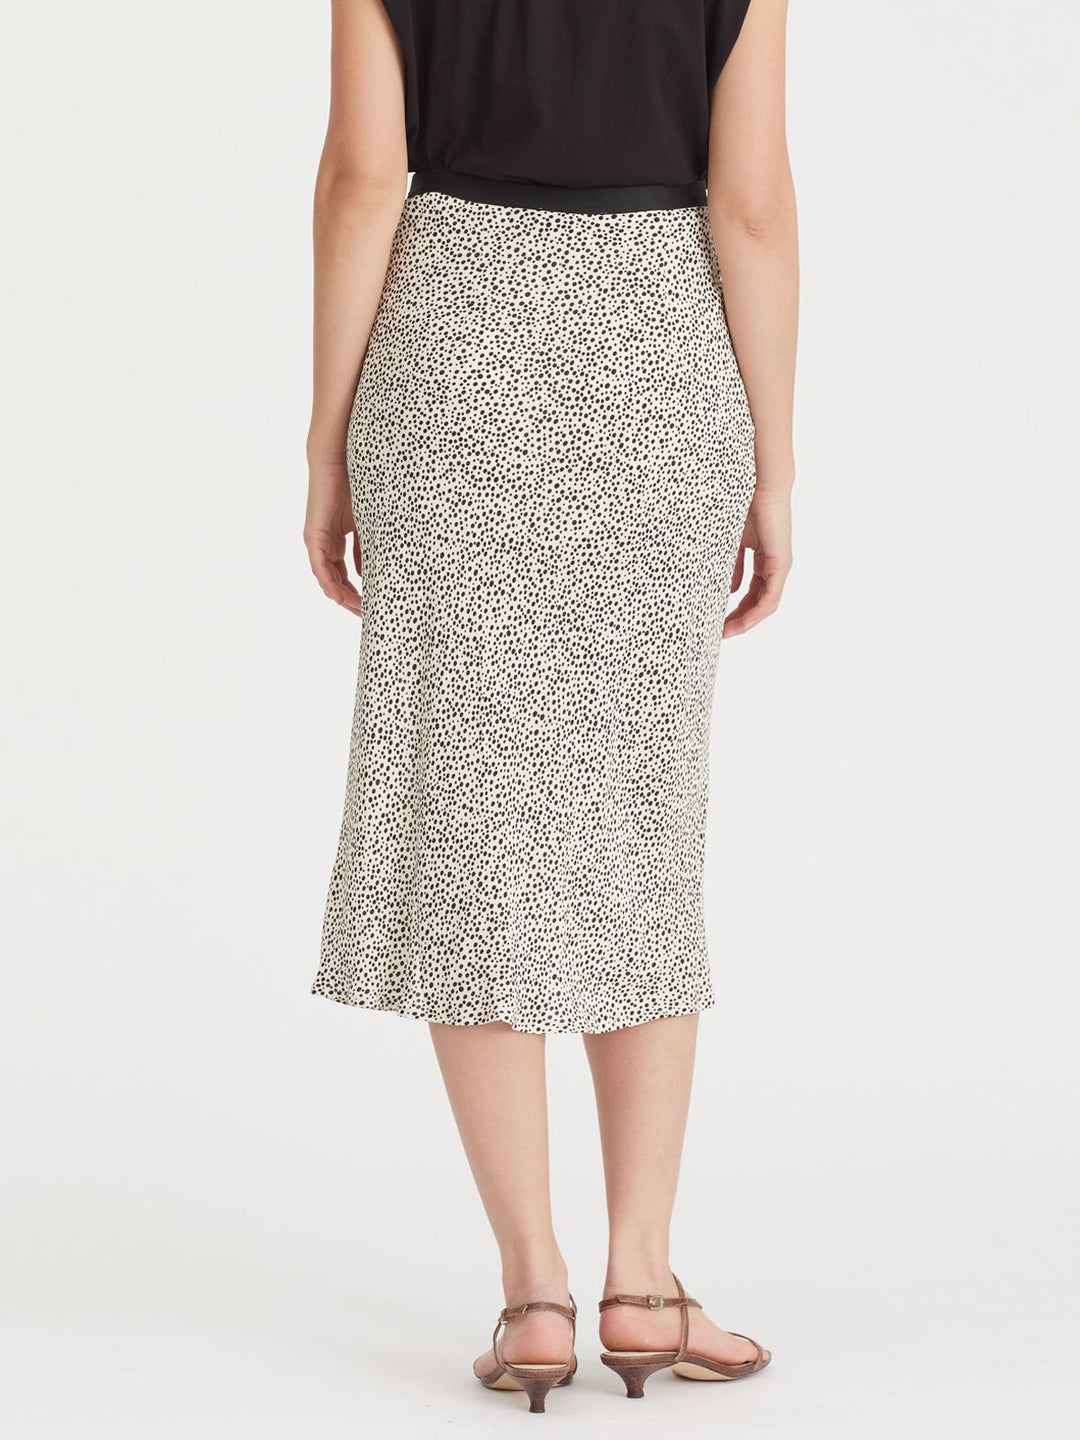 GOOD TIMES MIDI SKIRT - TEENY SPOTS - Kingfisher Road - Online Boutique